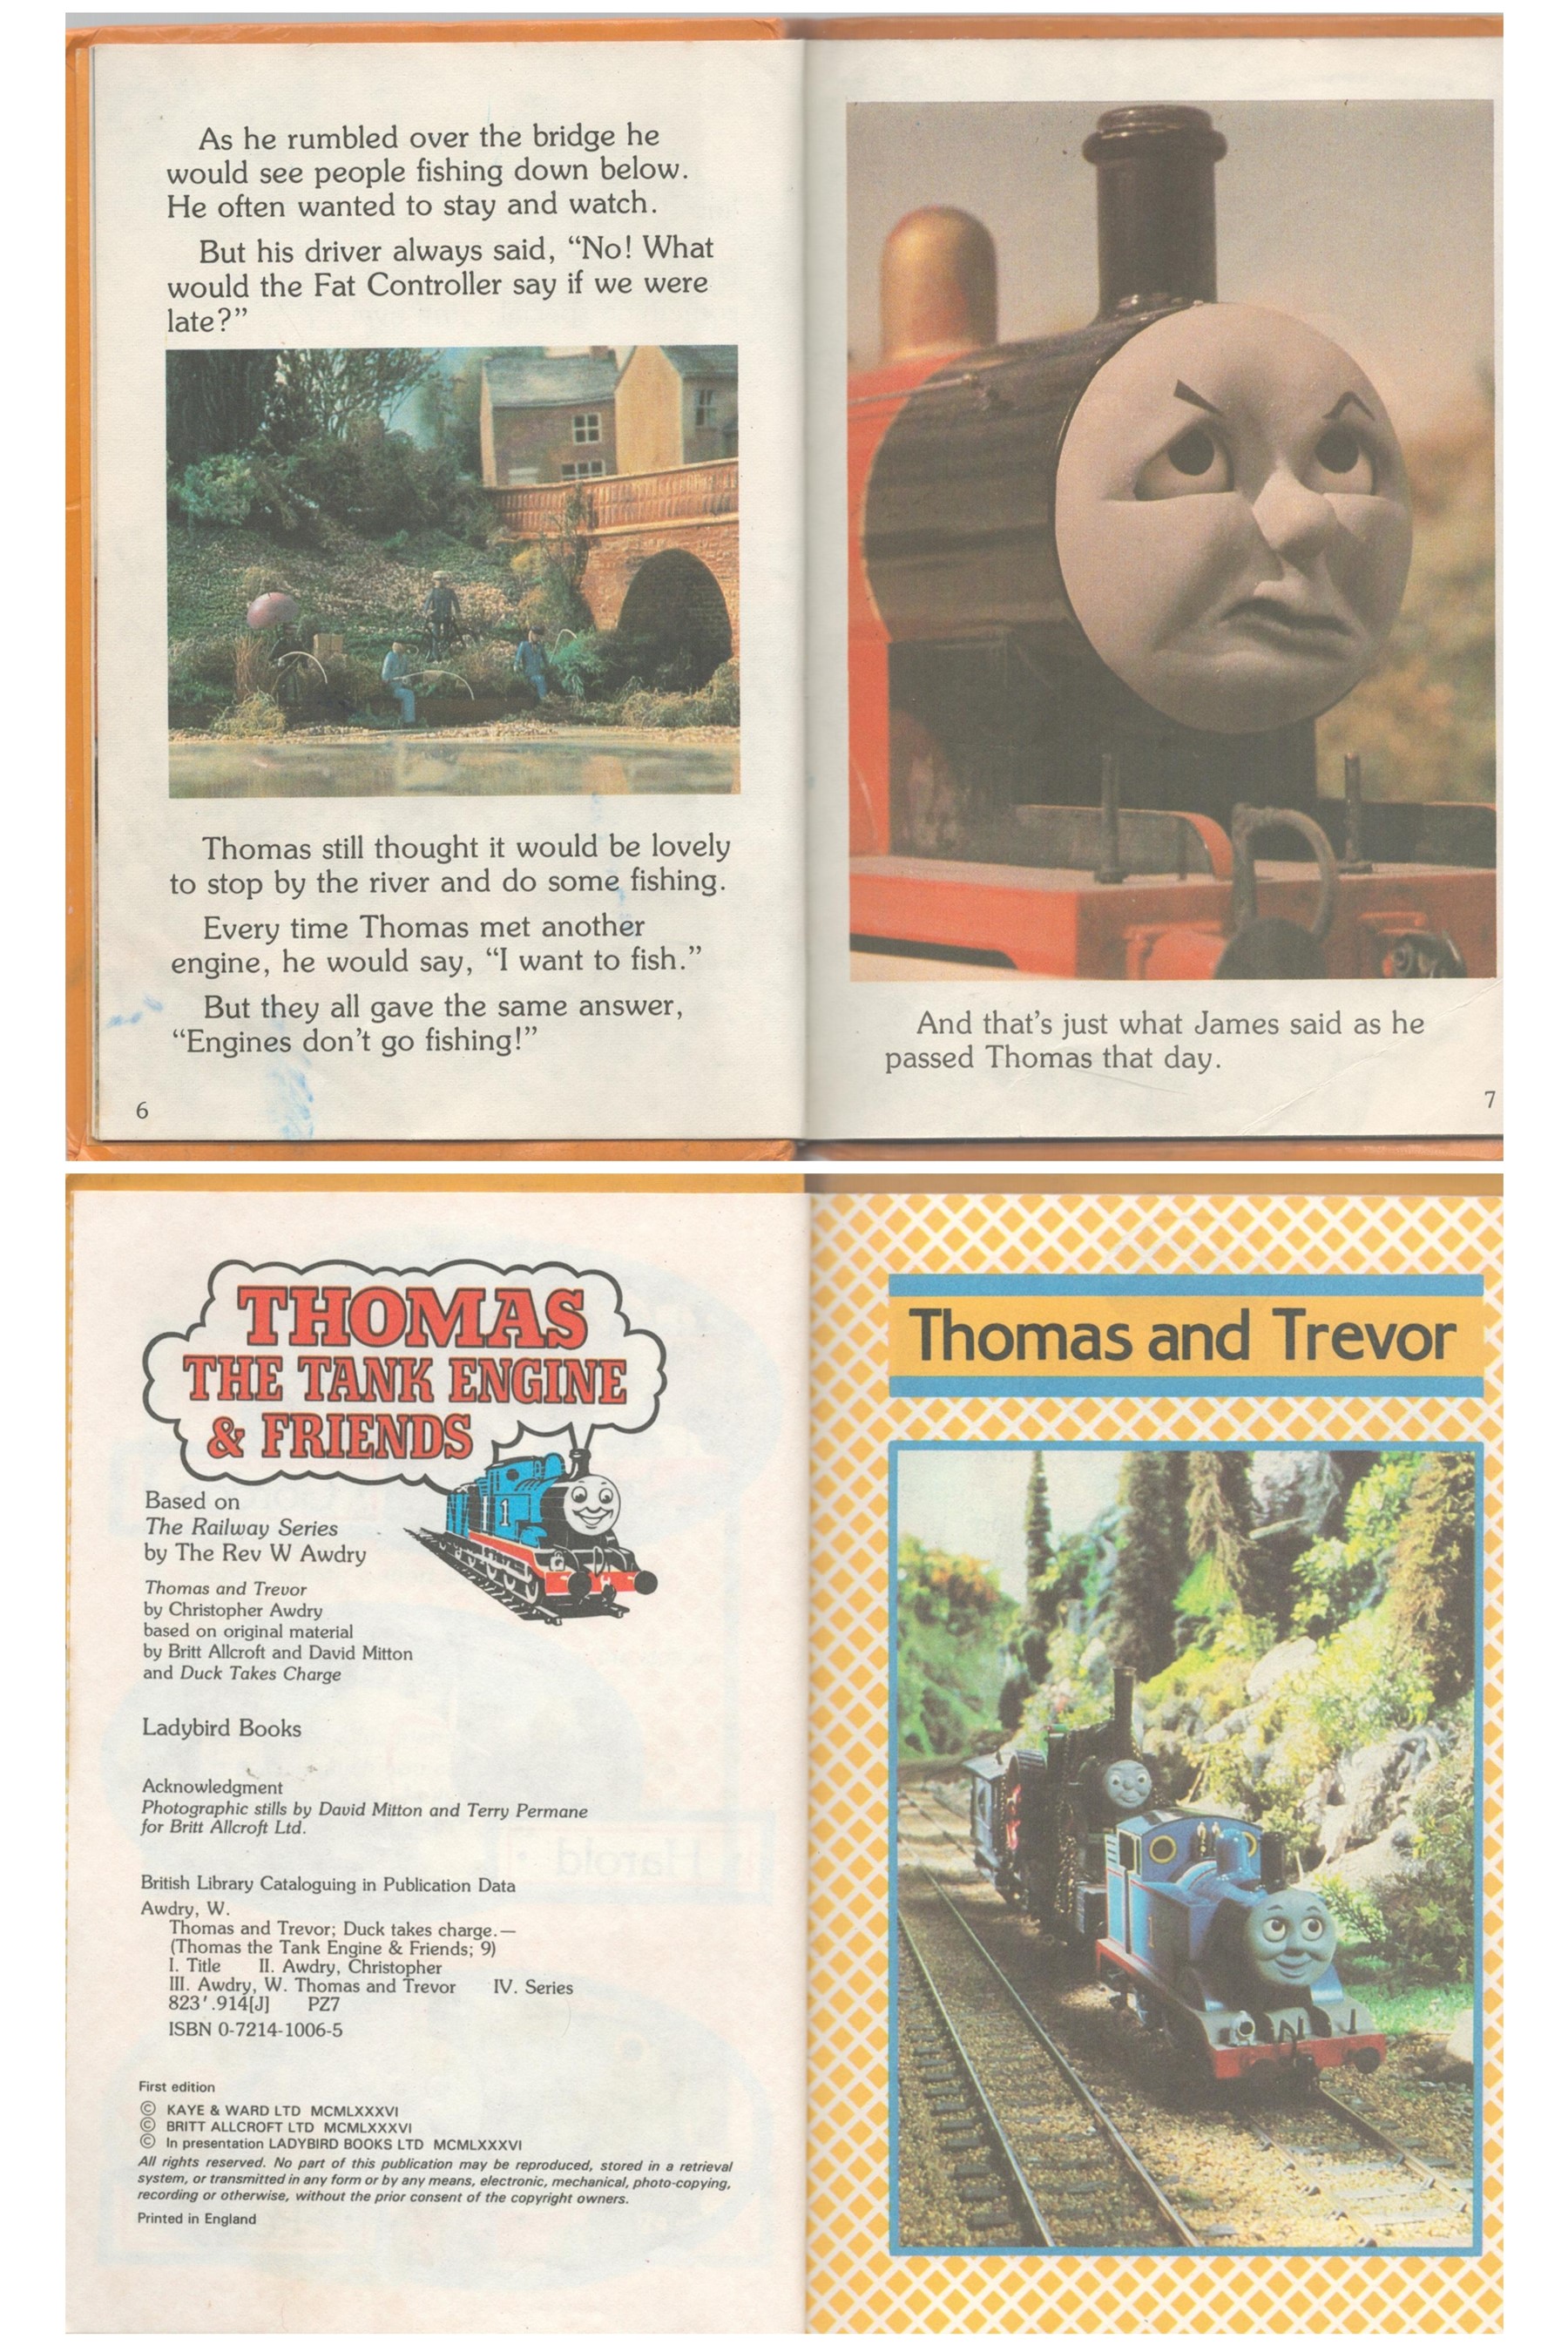 Thomas The Tank Engine and Friends vintage Ladybird book collection featuring 7 hardback books - Image 3 of 4